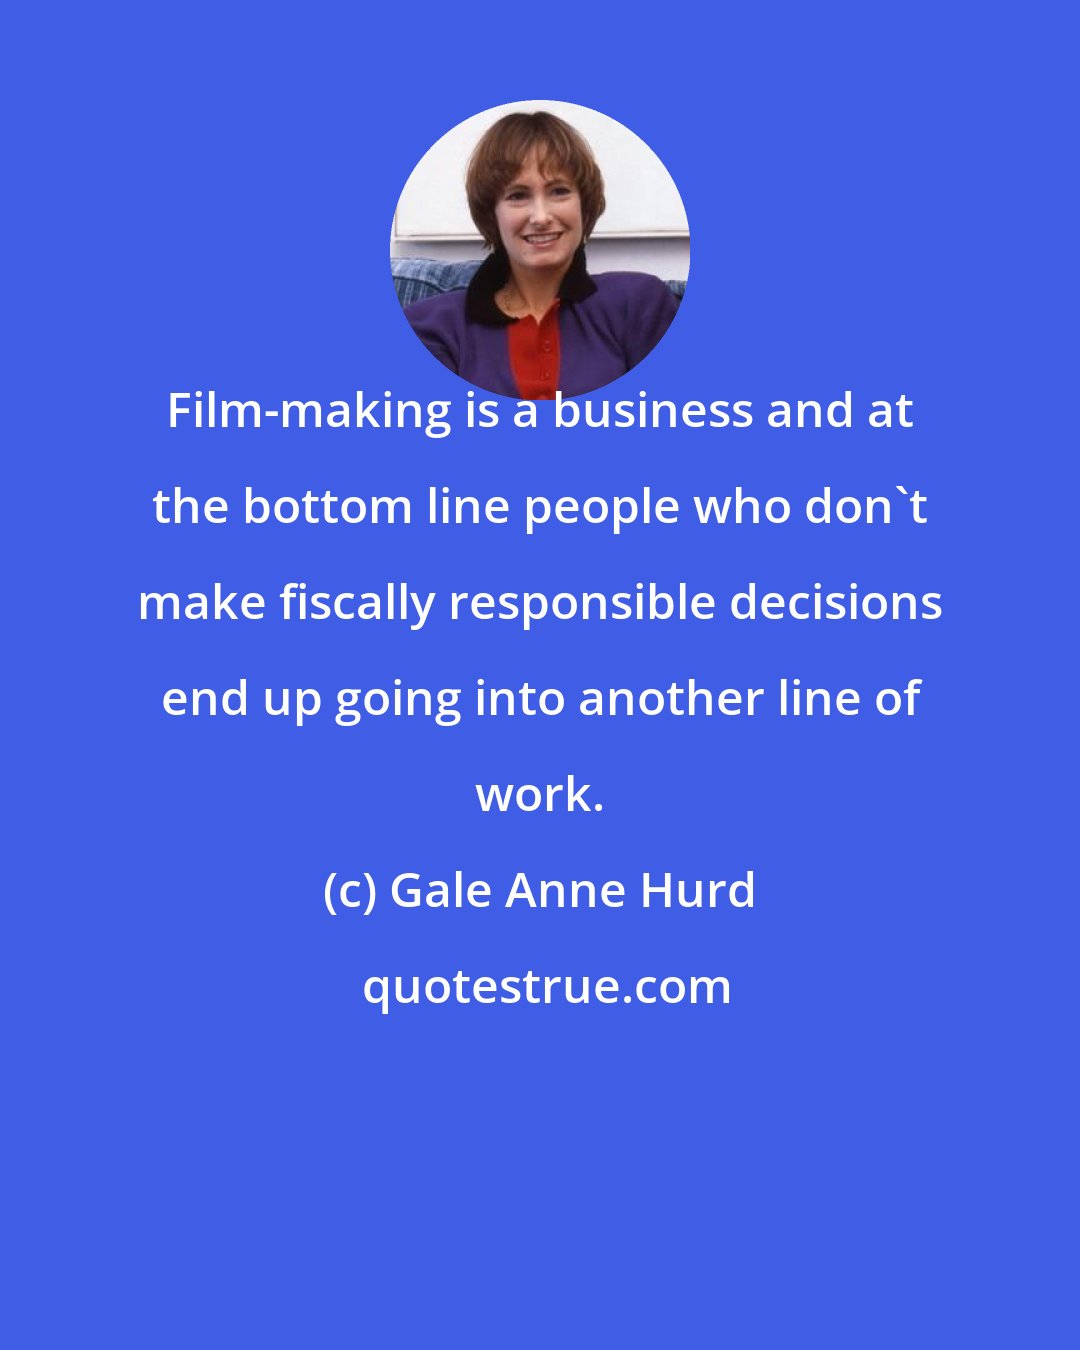 Gale Anne Hurd: Film-making is a business and at the bottom line people who don't make fiscally responsible decisions end up going into another line of work.